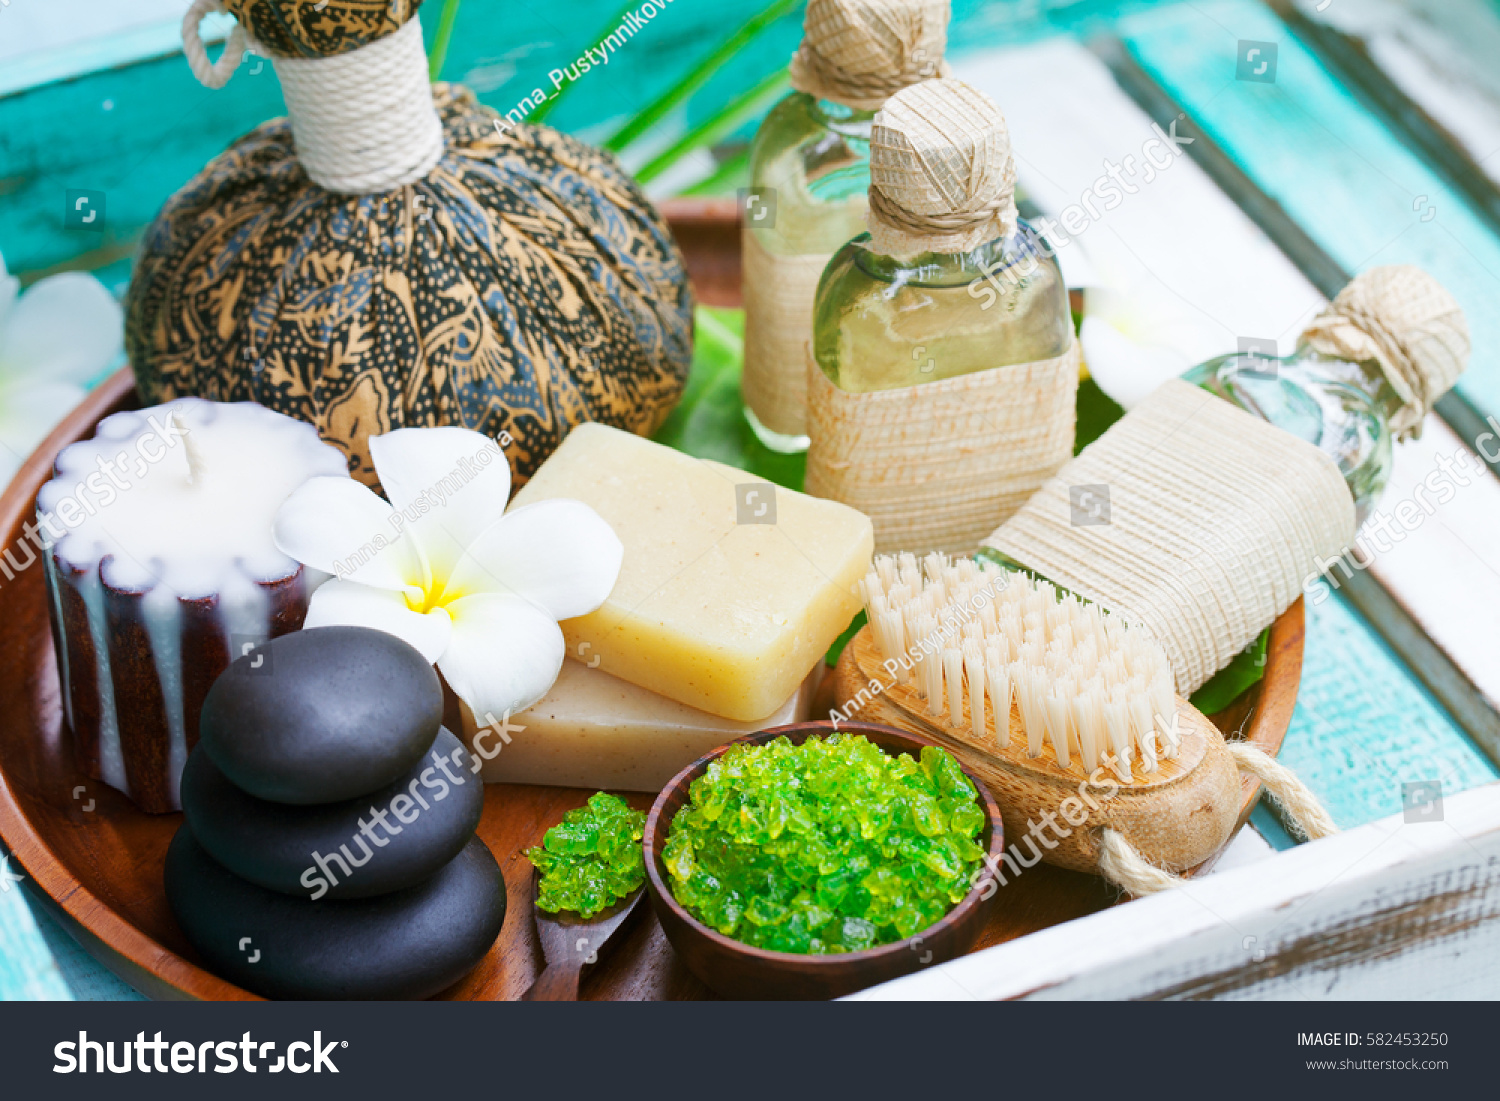 Spa and wellness massage setting. Still life with candle, towel and stones. Outdoor summer background. #582453250